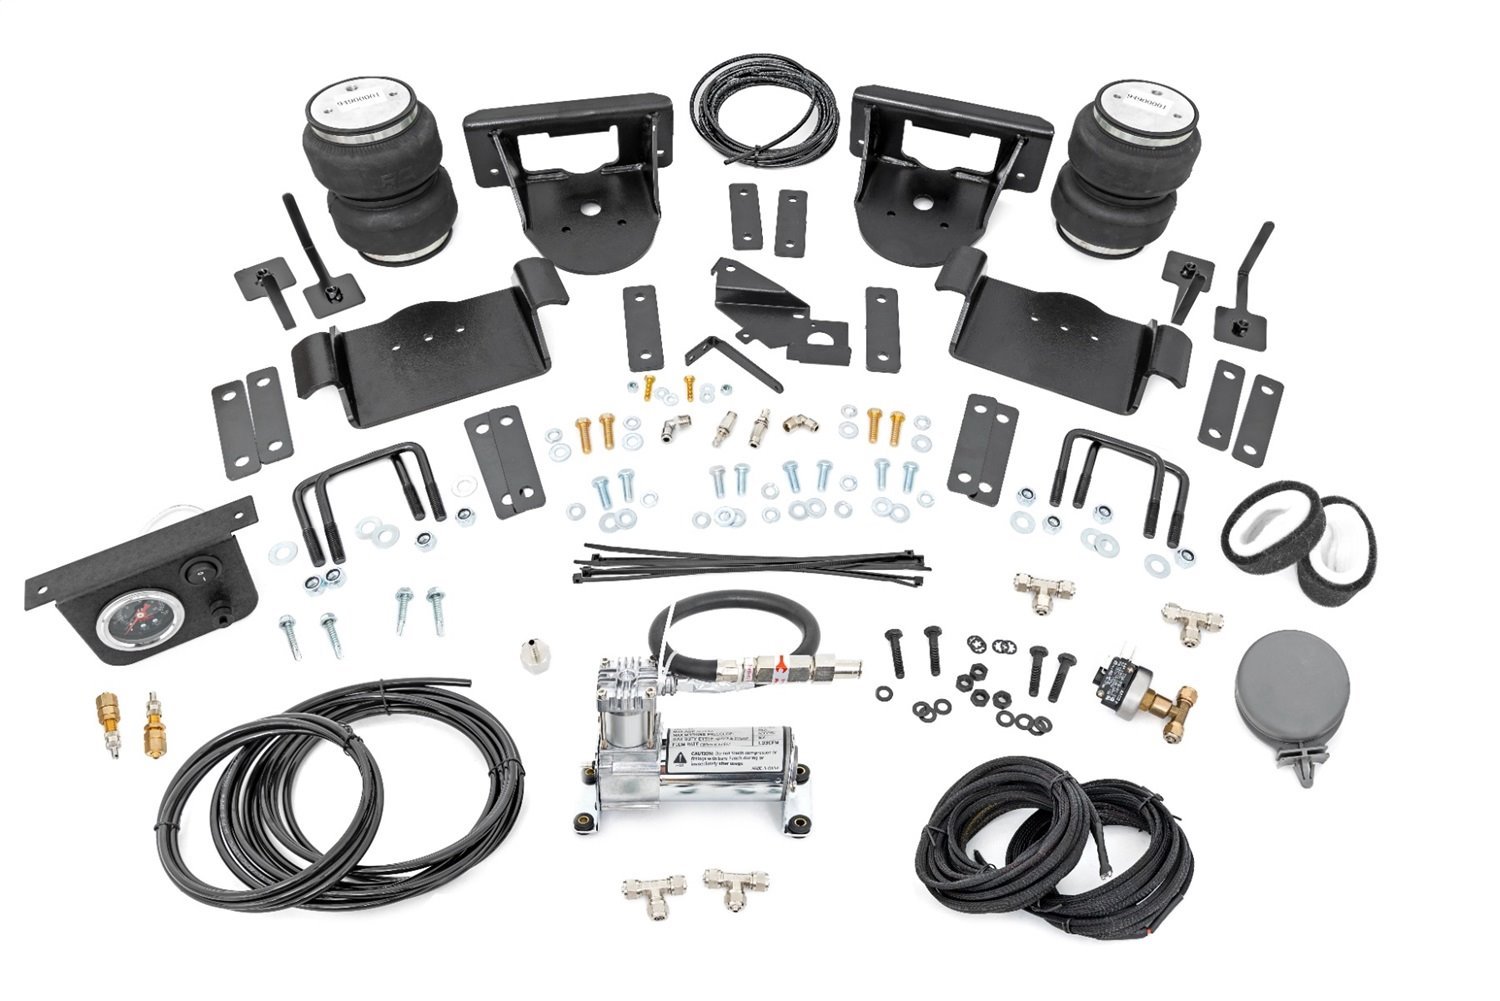 10009C Air Spring Kit w/Compressor, 0-6" Lifts, Fits Select Ford F150 4WD